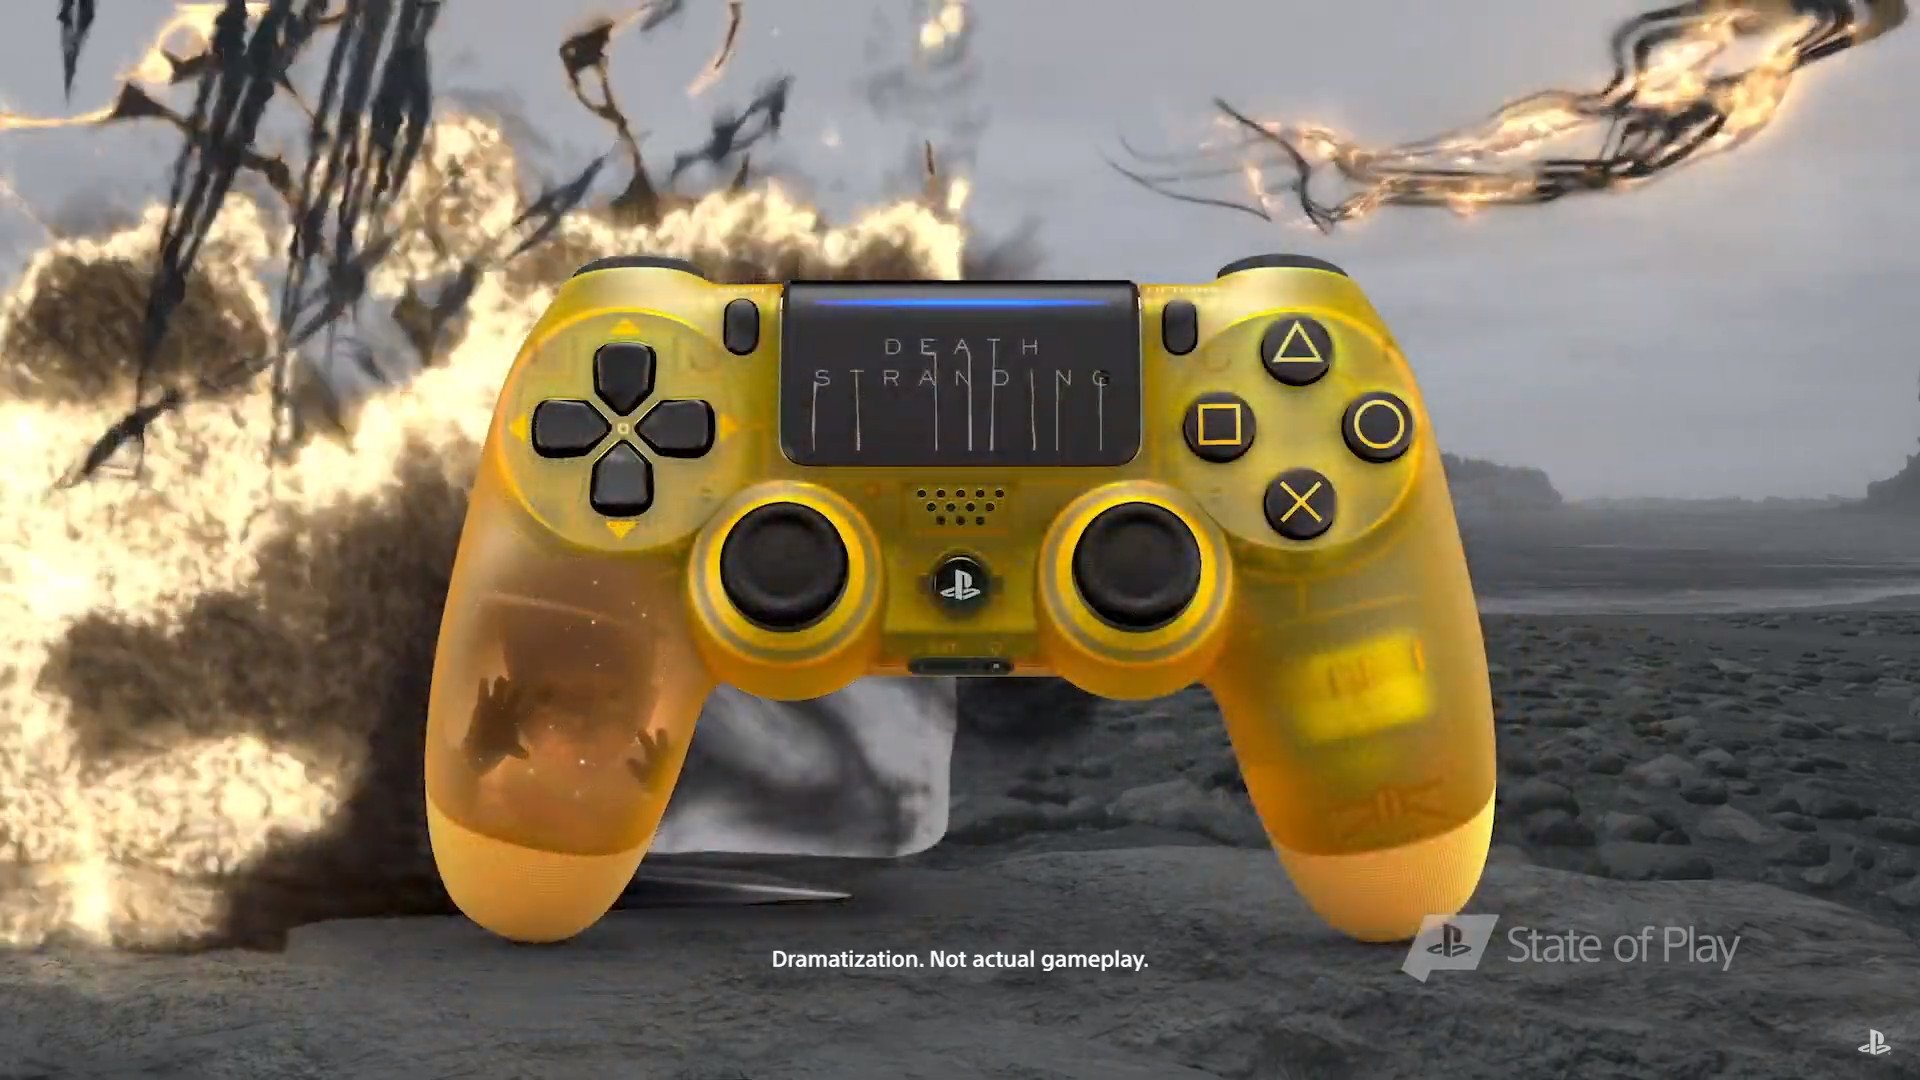 rent tvetydigheden samle Polygon on Twitter: "Death Stranding is getting its own PS4 Pro hardware,  with a gold bridge baby DualShock 4 https://t.co/f8RV7kLV8i  https://t.co/H5rpgxjIbA" / X